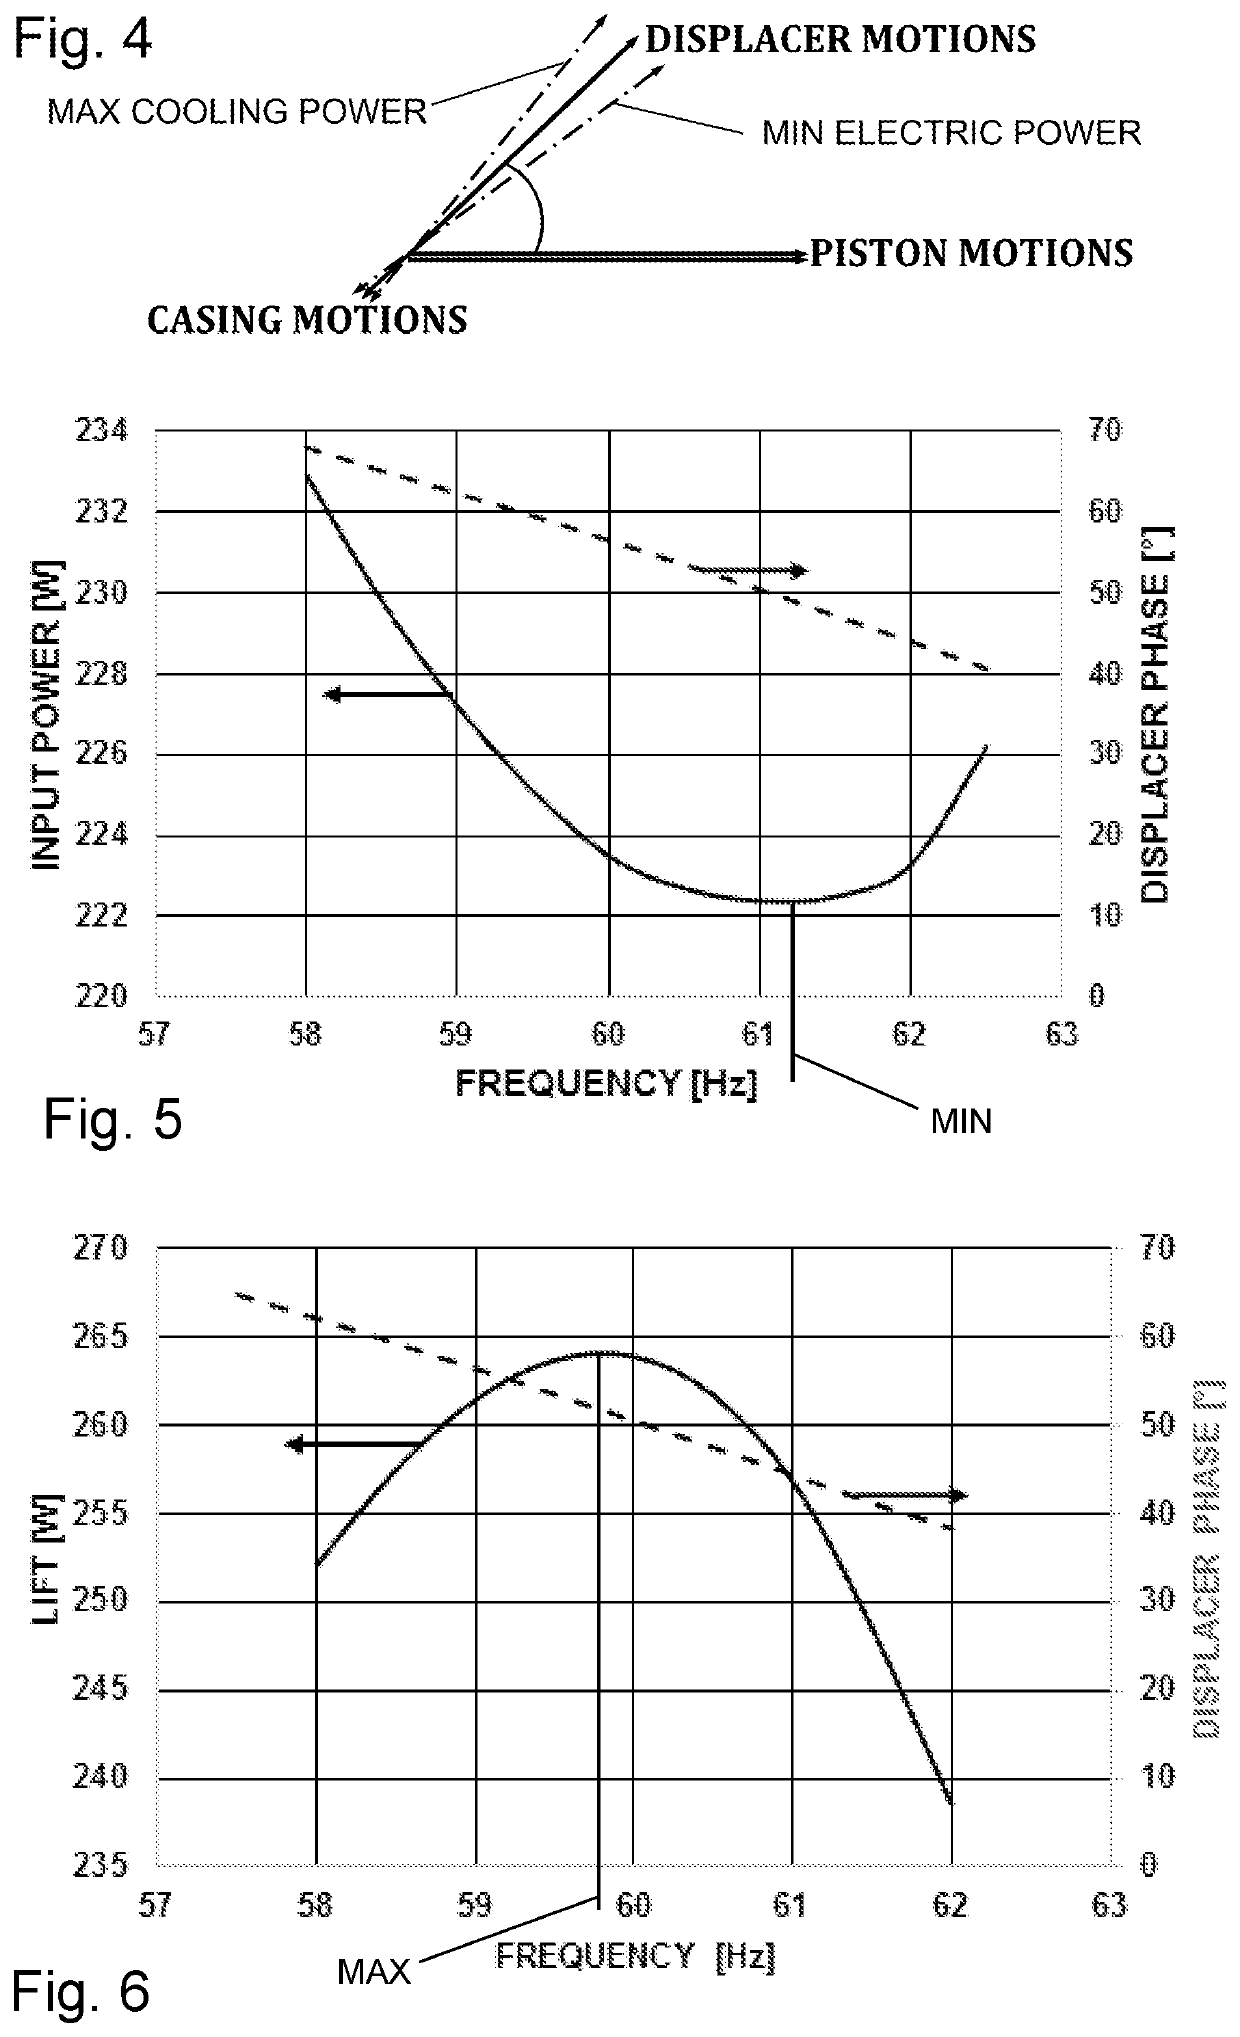 Dynamic Frequency Tuning For Driving A Free-Piston Gamma-Type Stirling Heat-Pump At Minimum Electrical Power Input Or Maximum Thermal Cooling Power Depending Upon Current Thermal Conditions